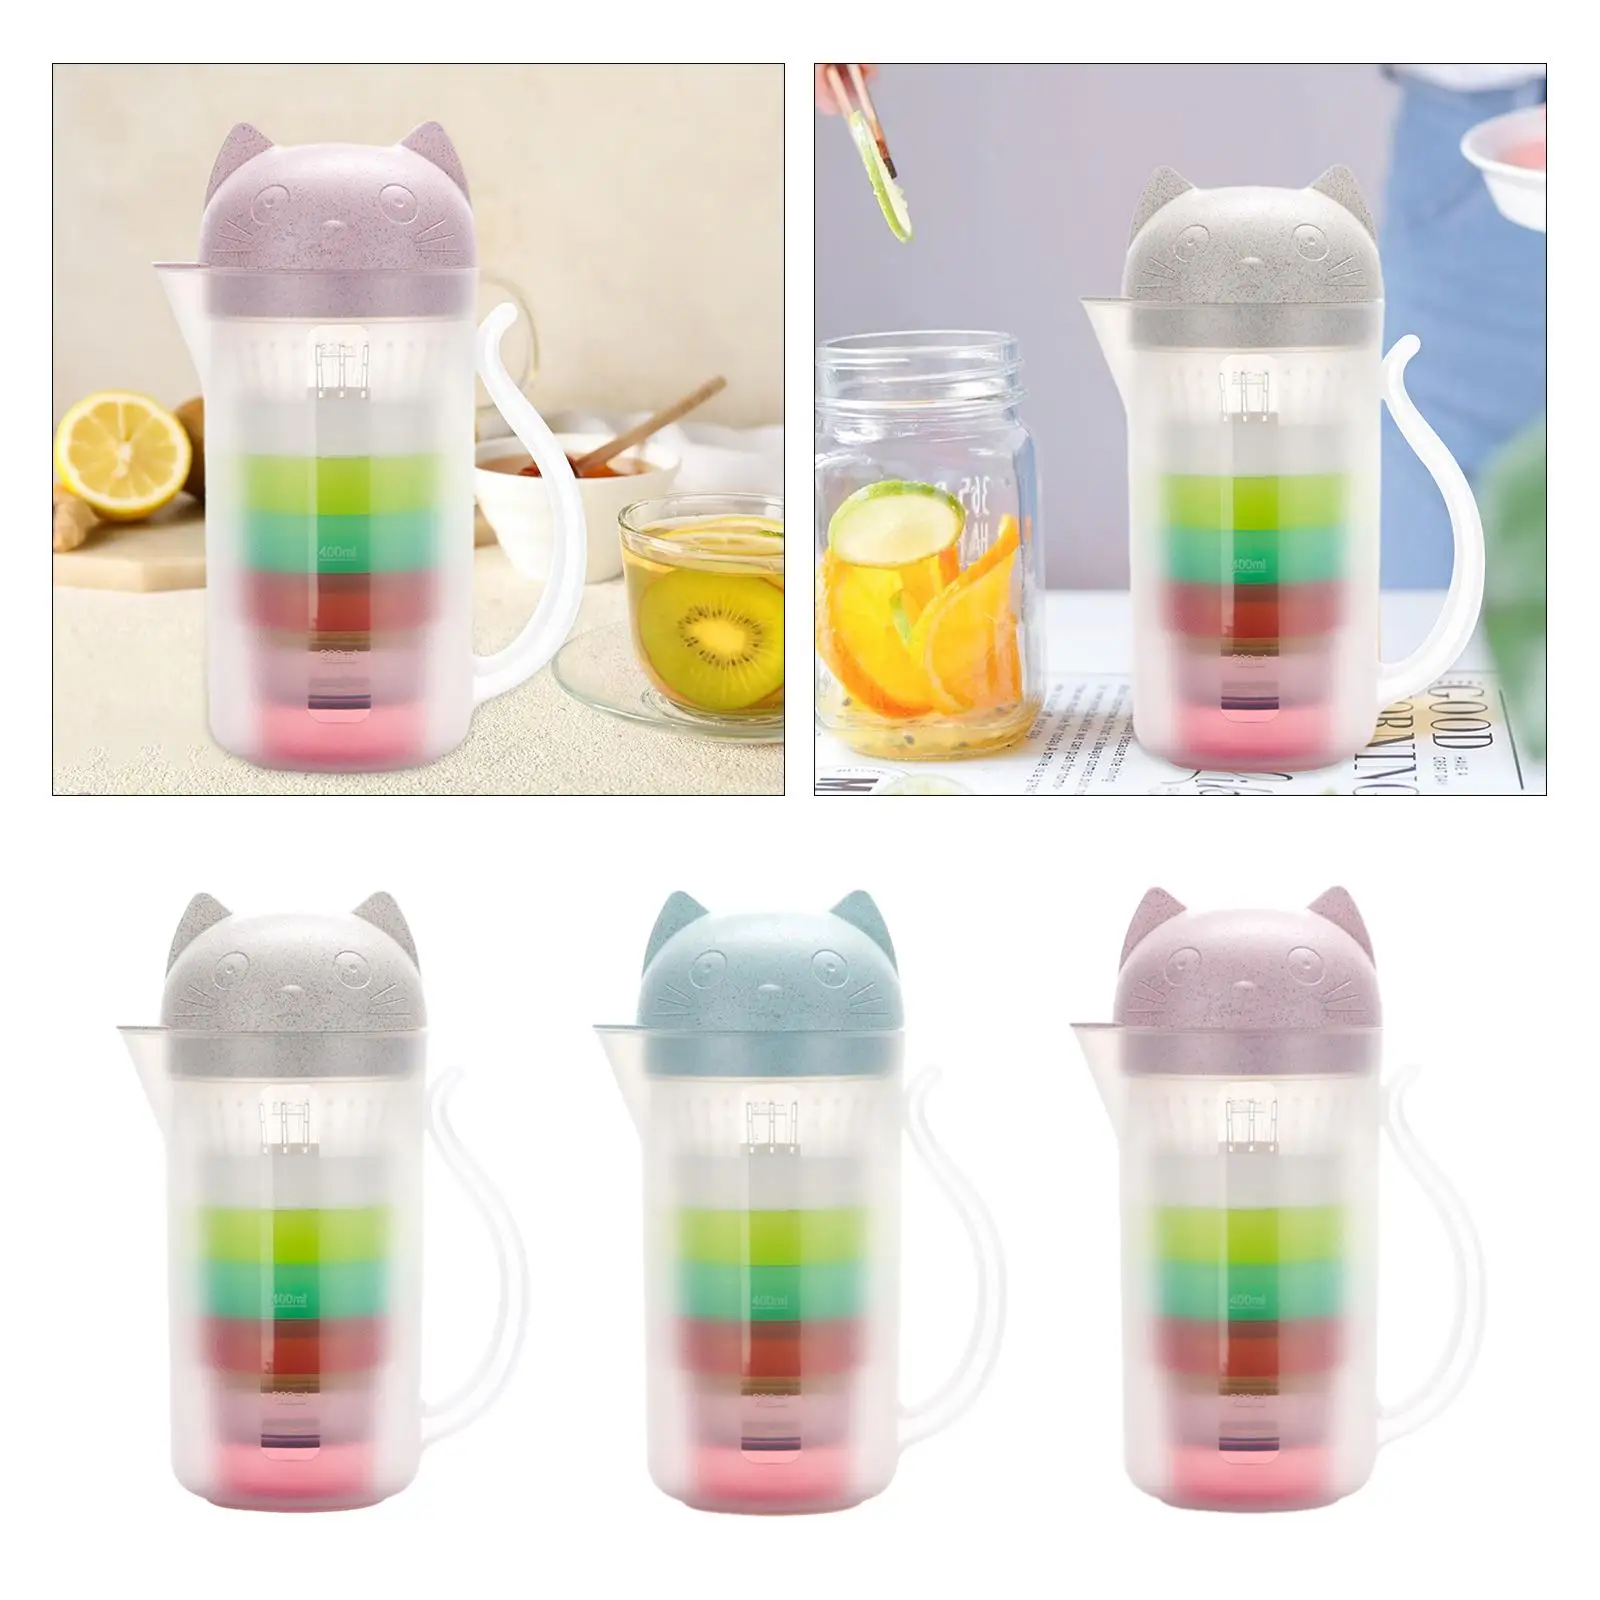 Water Pitcher with Lid Heat Resistant Cute Portable Beverage Serveware for Coffee Hot/Cold Water Milk Homemade Beverage Parties